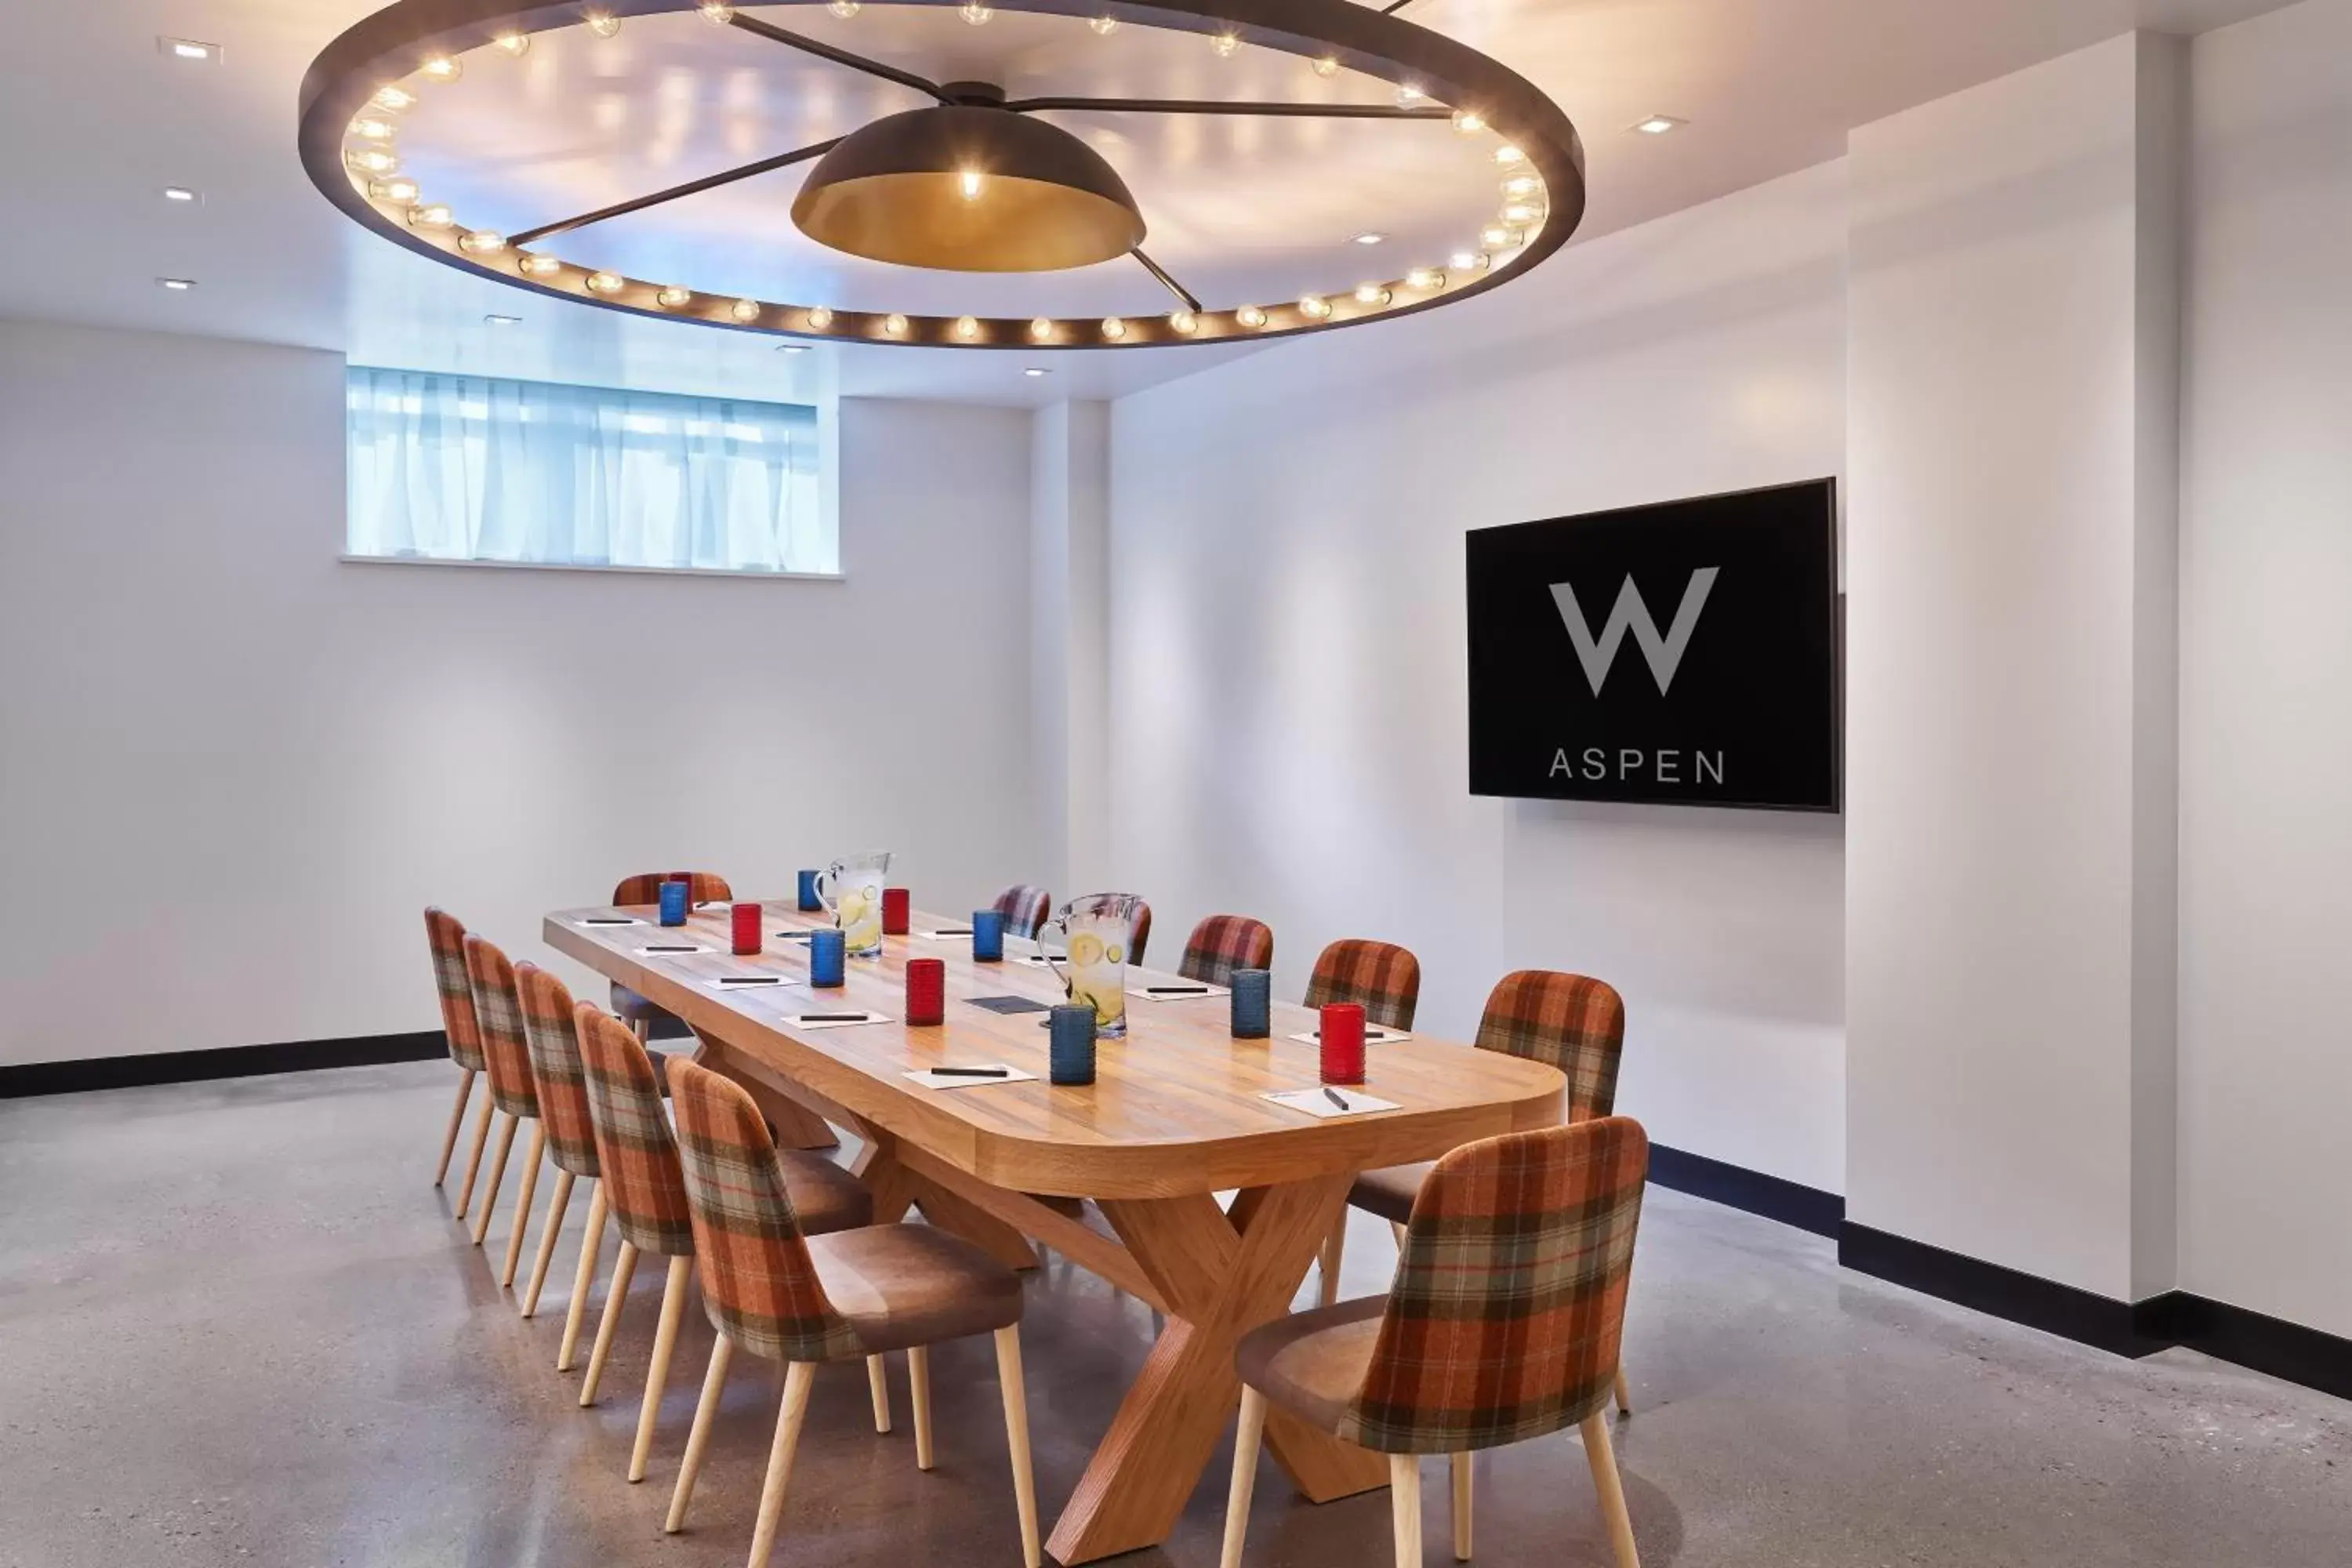 Meeting/conference room in W Aspen